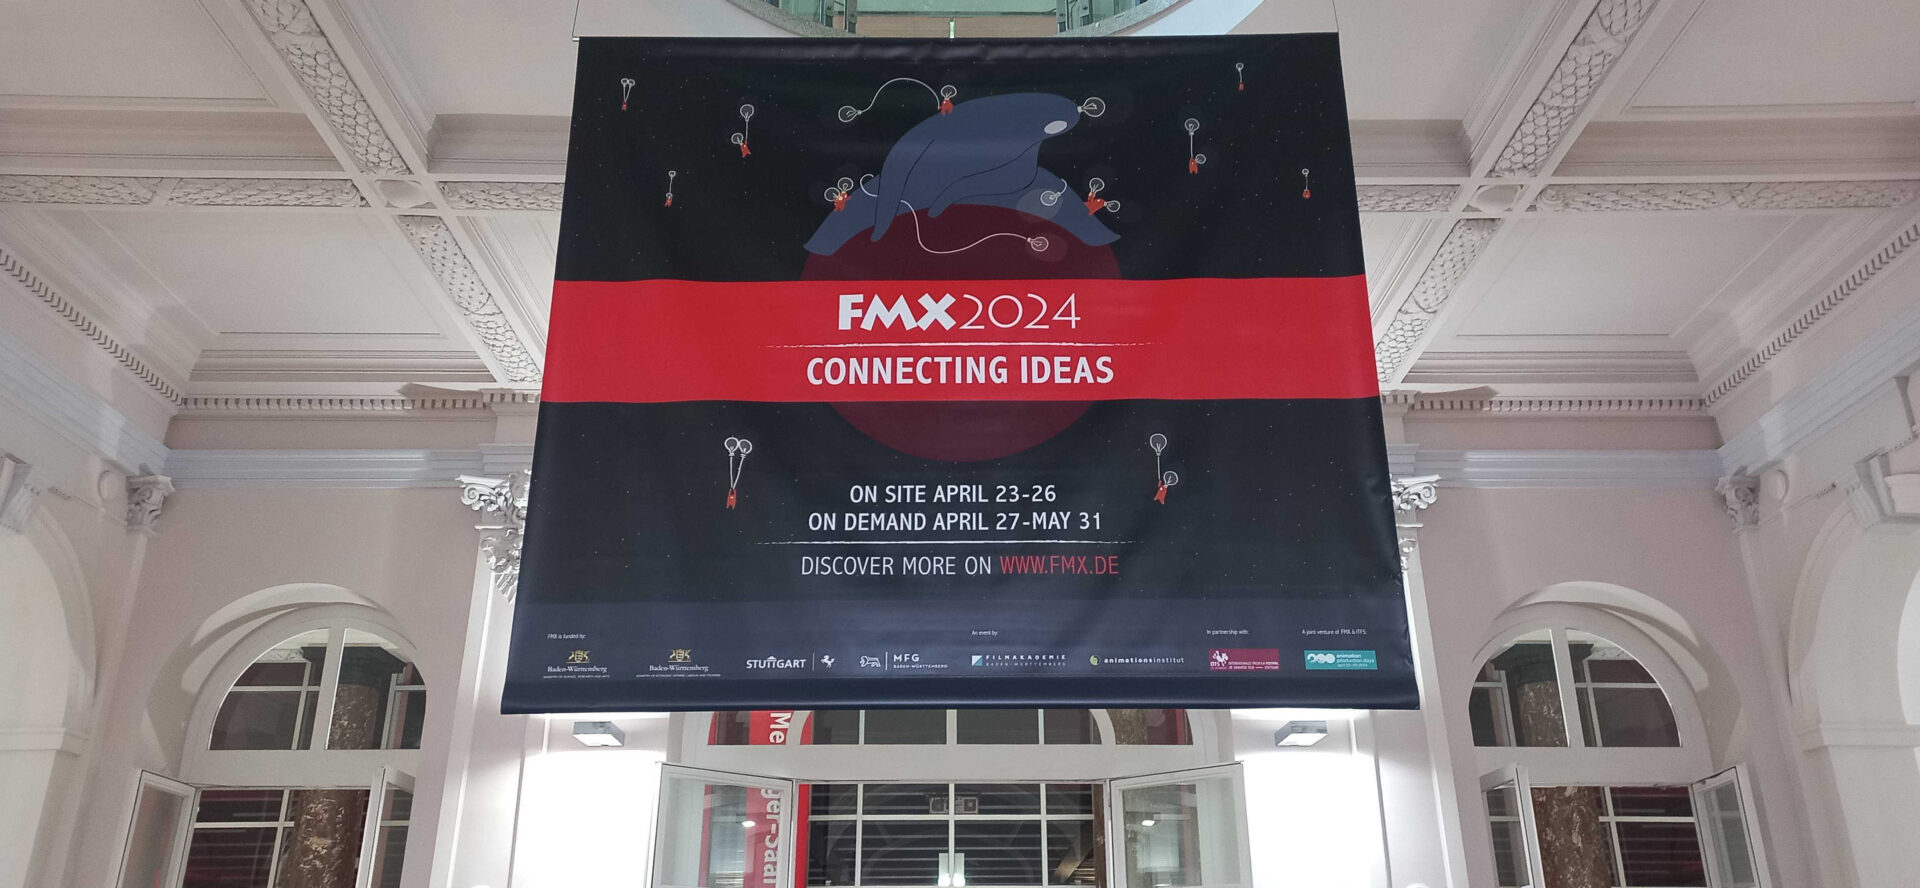 Connecting ideas at FMX 2024